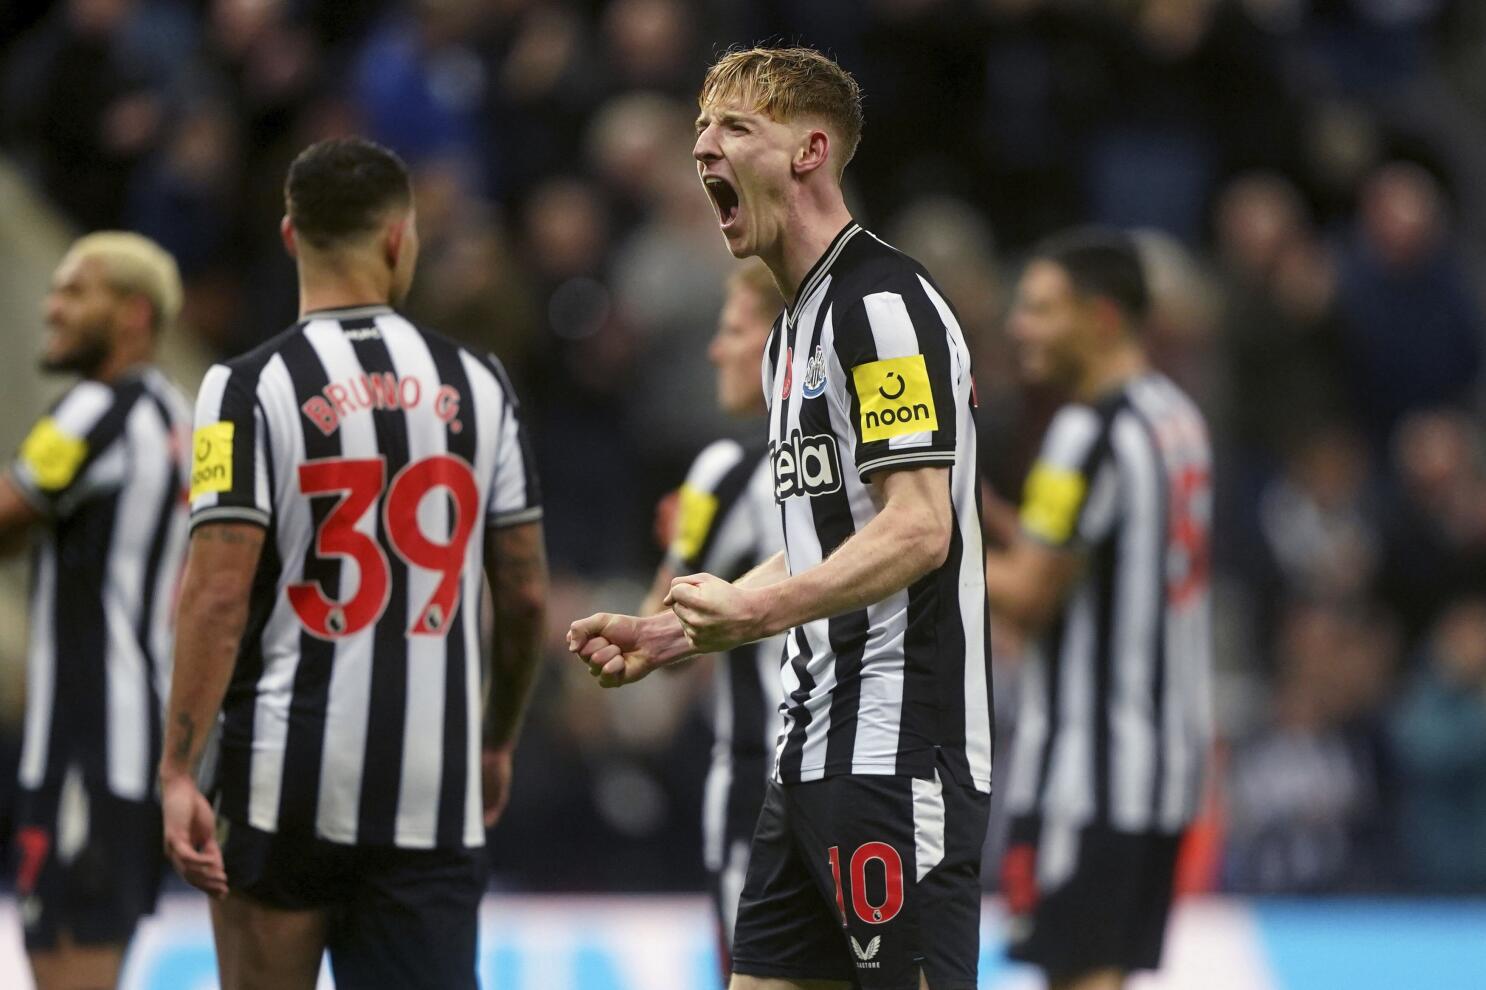 Champions League: Newcastle overpowers PSG 4-1